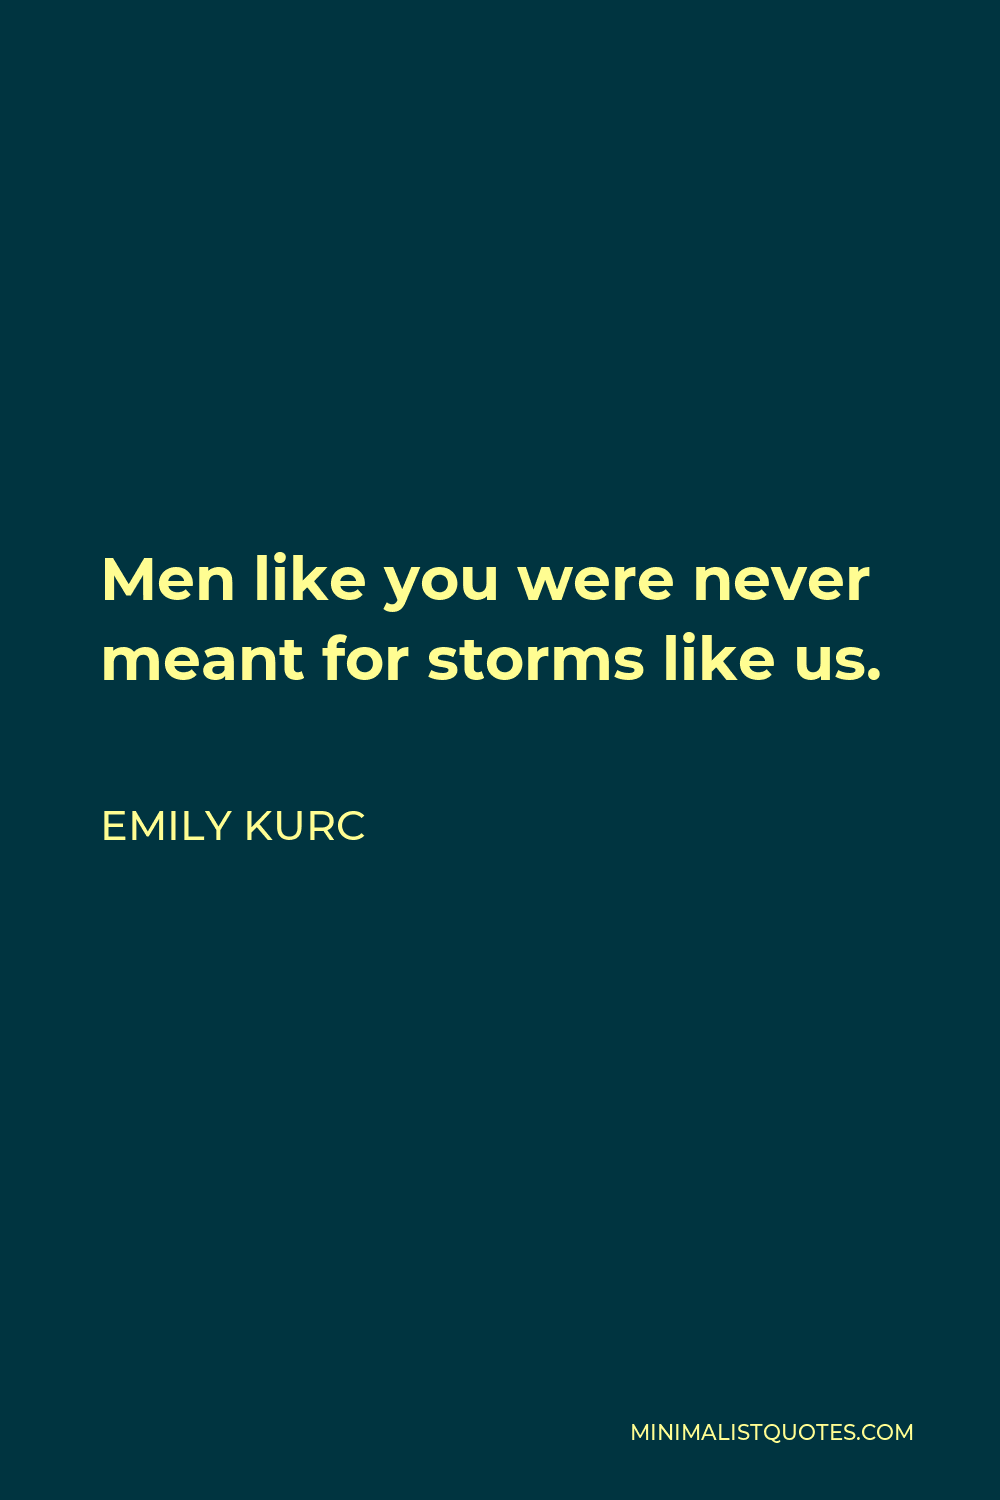 Emily Kurc Quote - Men like you were never meant for storms like us.